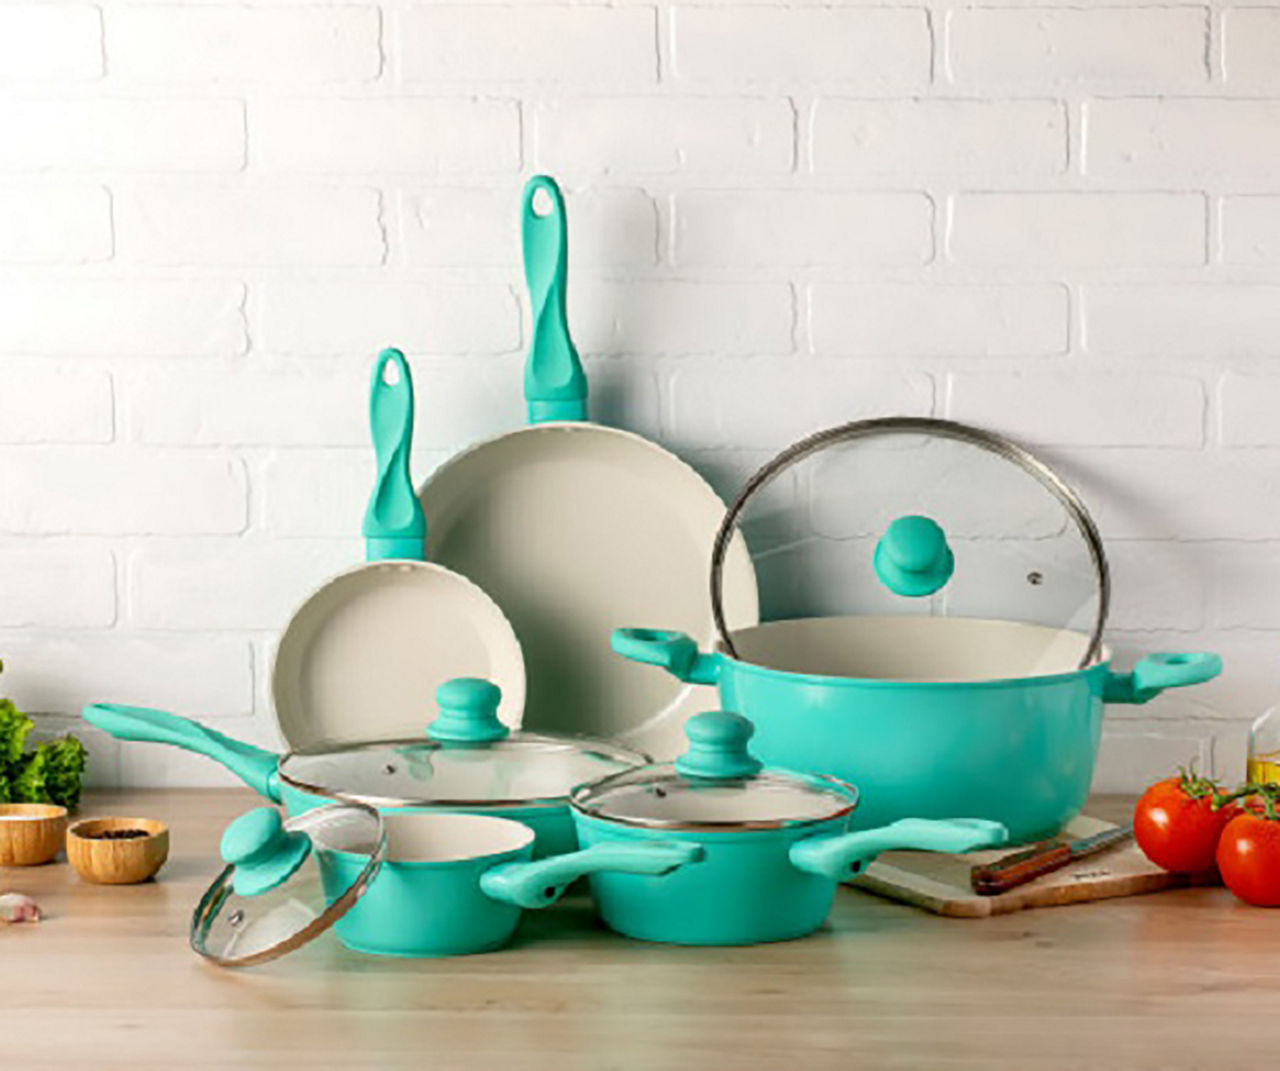 IMUSA - Teal Forged Ceramic 10-Piece Cookware Set